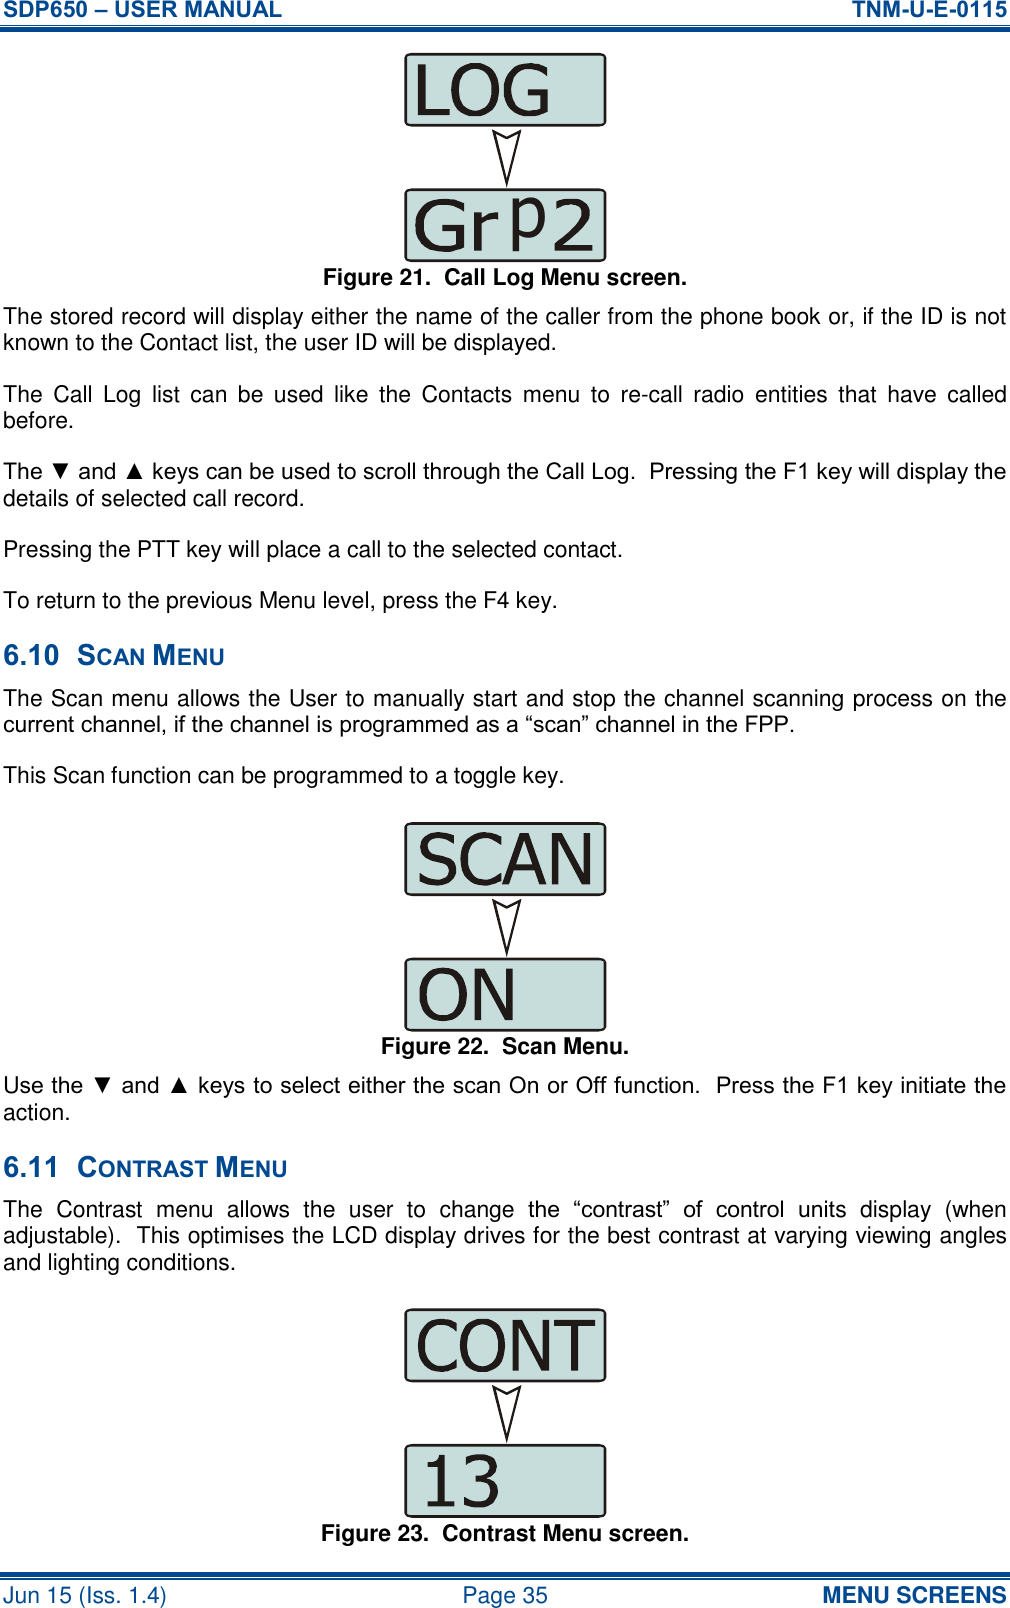 SDP650 – USER MANUAL  TNM-U-E-0115 Jun 15 (Iss. 1.4)  Page 35 MENU SCREENS Figure 21.  Call Log Menu screen. The stored record will display either the name of the caller from the phone book or, if the ID is not known to the Contact list, the user ID will be displayed. The  Call  Log  list  can  be  used  like  the  Contacts  menu  to  re-call  radio  entities  that  have  called before. The ▼ and ▲ keys can be used to scroll through the Call Log.  Pressing the F1 key will display the details of selected call record. Pressing the PTT key will place a call to the selected contact. To return to the previous Menu level, press the F4 key. 6.10 SCAN MENU The Scan menu allows the User to manually start and stop the channel scanning process on the current channel, if the channel is programmed as a “scan” channel in the FPP. This Scan function can be programmed to a toggle key. Figure 22.  Scan Menu. Use the ▼ and ▲ keys to select either the scan On or Off function.  Press the F1 key initiate the action. 6.11 CONTRAST MENU The  Contrast  menu  allows  the  user  to  change  the  “contrast”  of  control  units  display  (when adjustable).  This optimises the LCD display drives for the best contrast at varying viewing angles and lighting conditions. Figure 23.  Contrast Menu screen. p